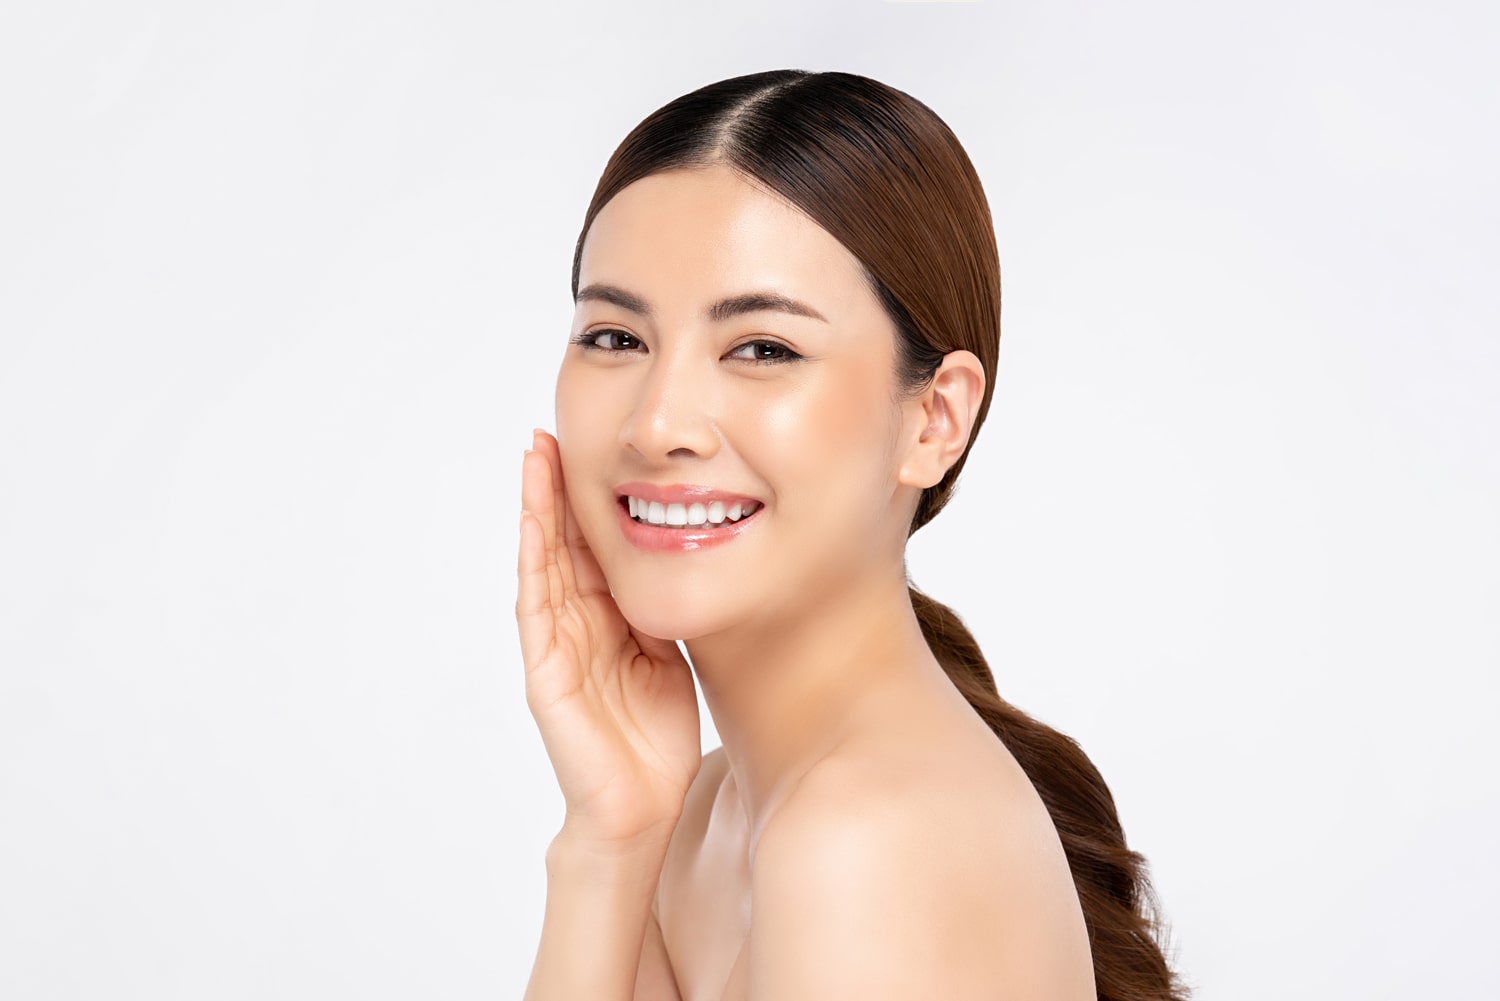 asian-woman-smiling-with-hand-touching-face-beauty-skin-care-concepts